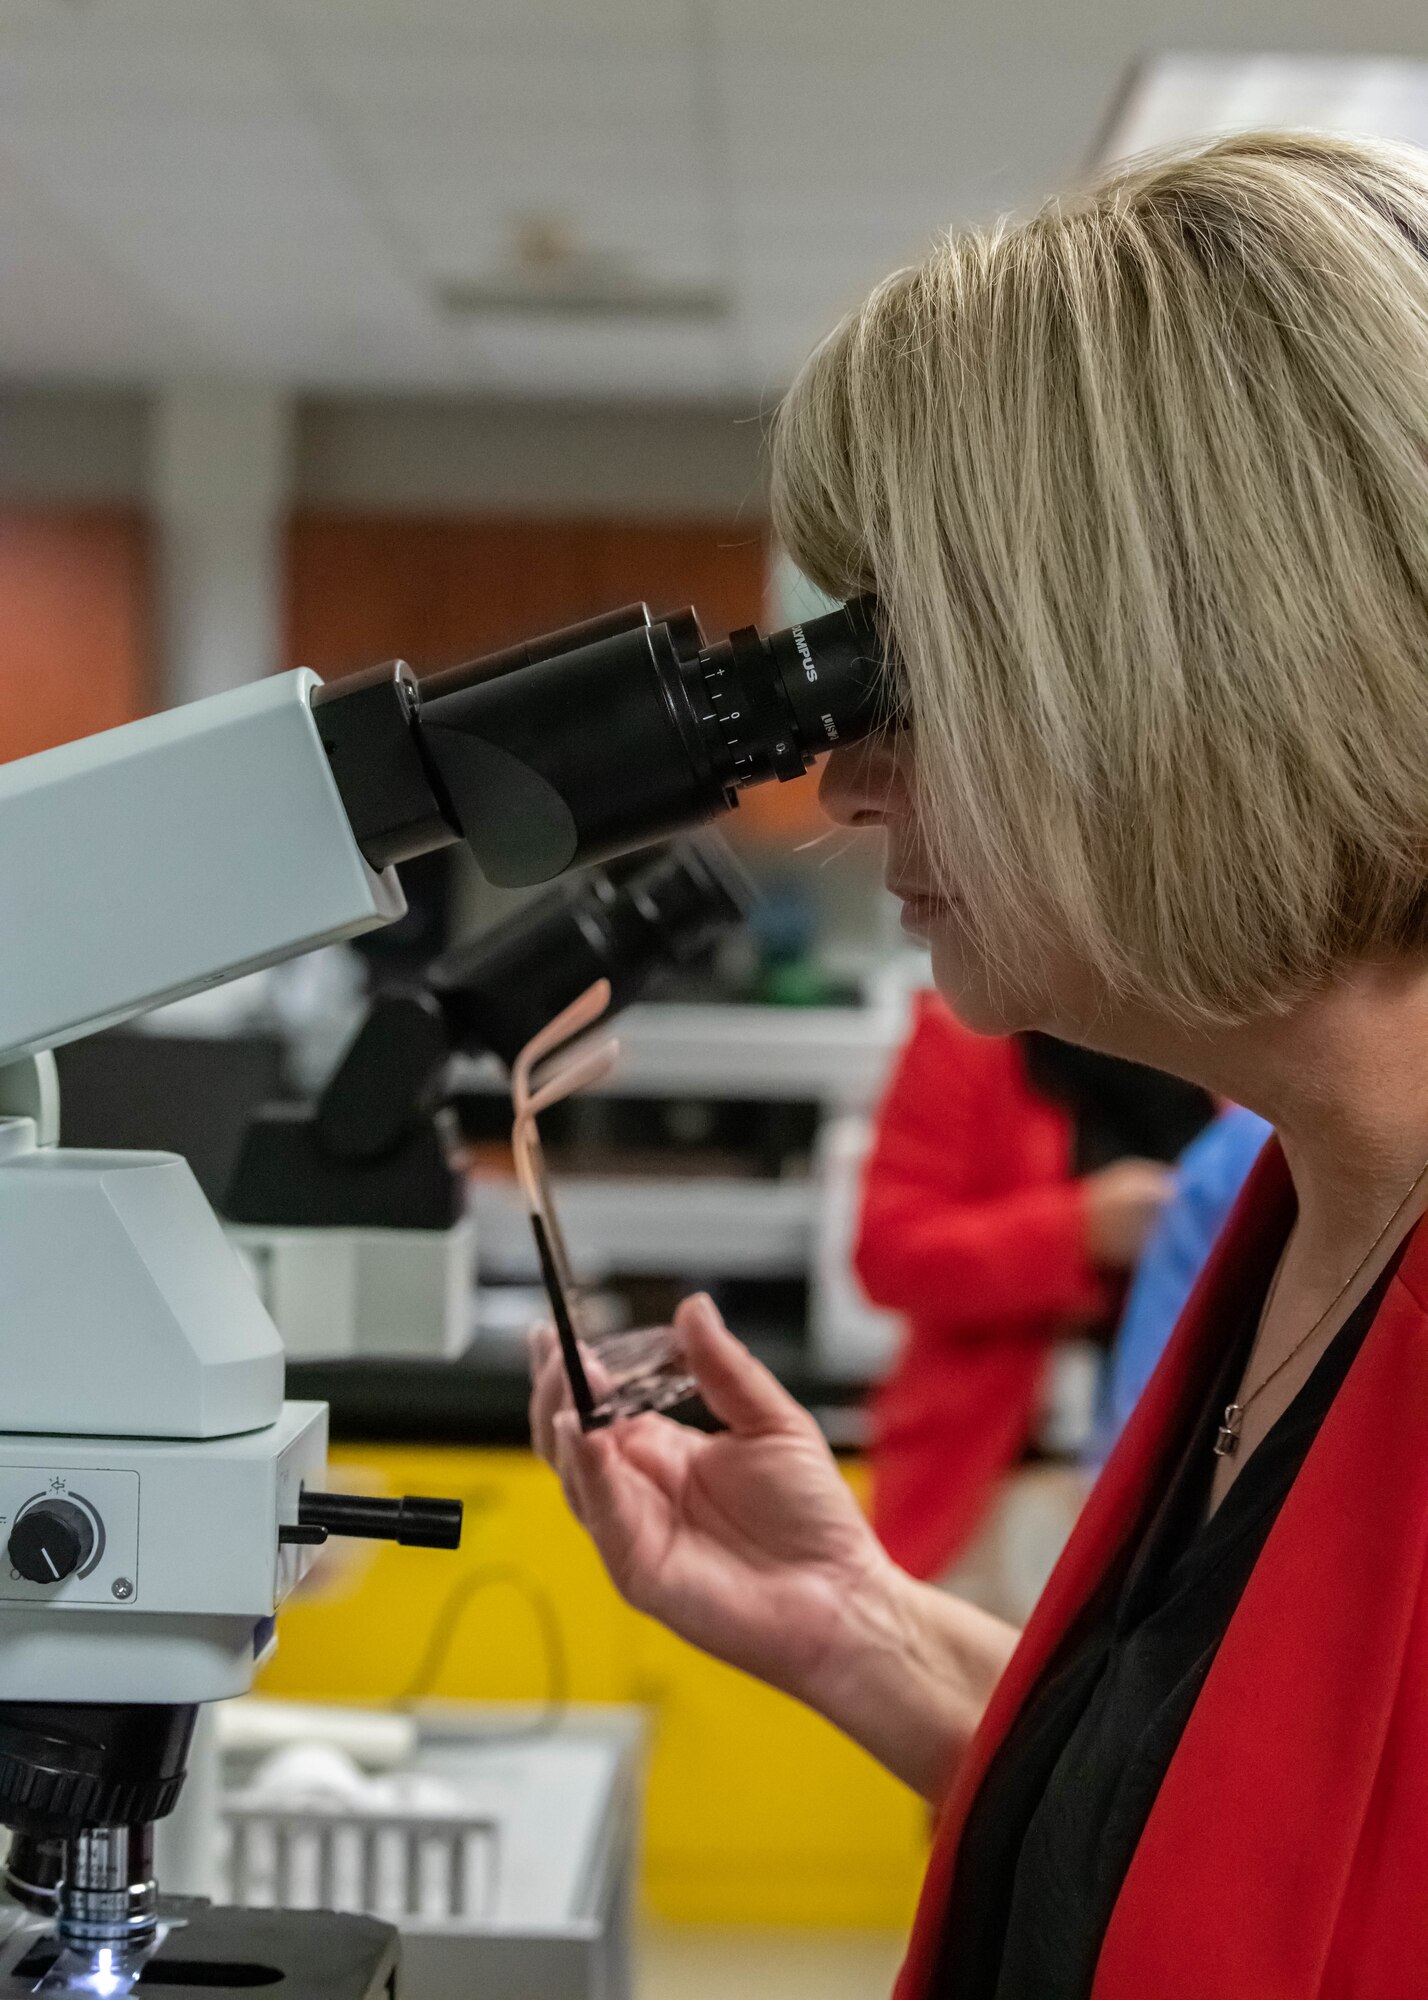 Brandi Haskans, La Joya Community High School principal, looks into a microscope at the medical treatment facility during the West Valley Educators Immersion Tour, March 31, 2023, at Luke Air Force Base, Arizona.